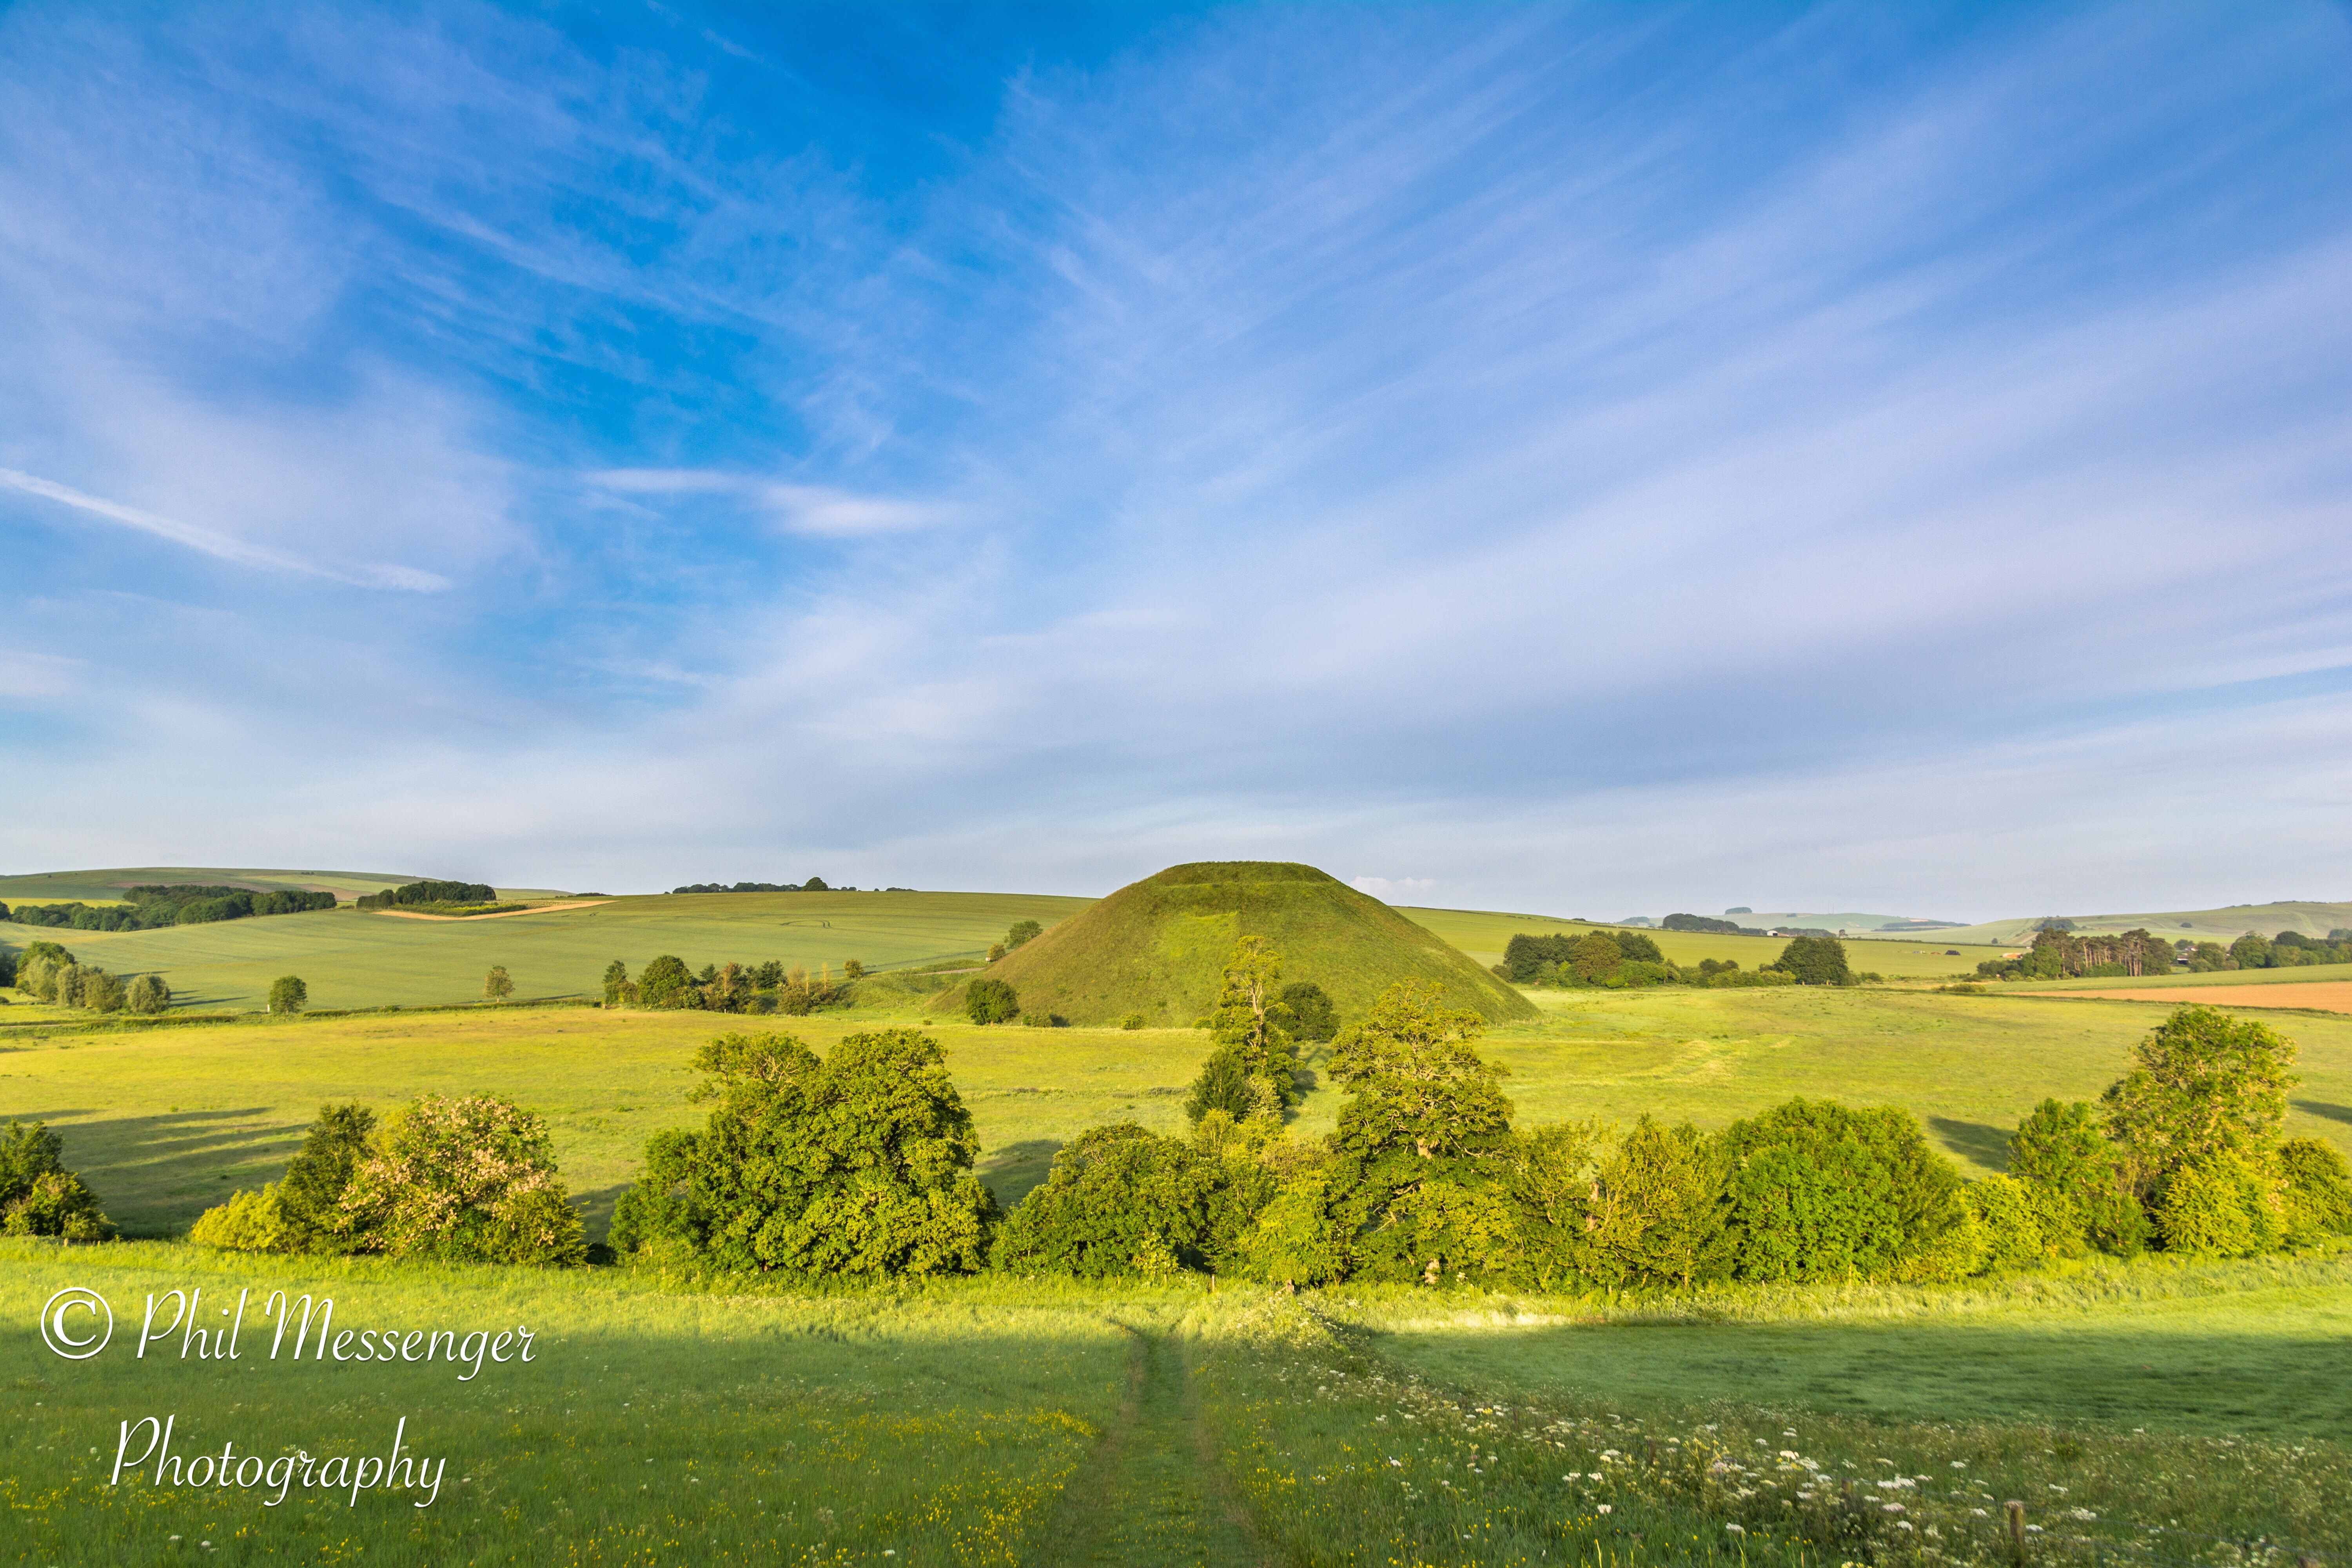 A more familiar view for photographers of Silbury hill, Marlborough. I liked the way the low sun lit up the whole scene.